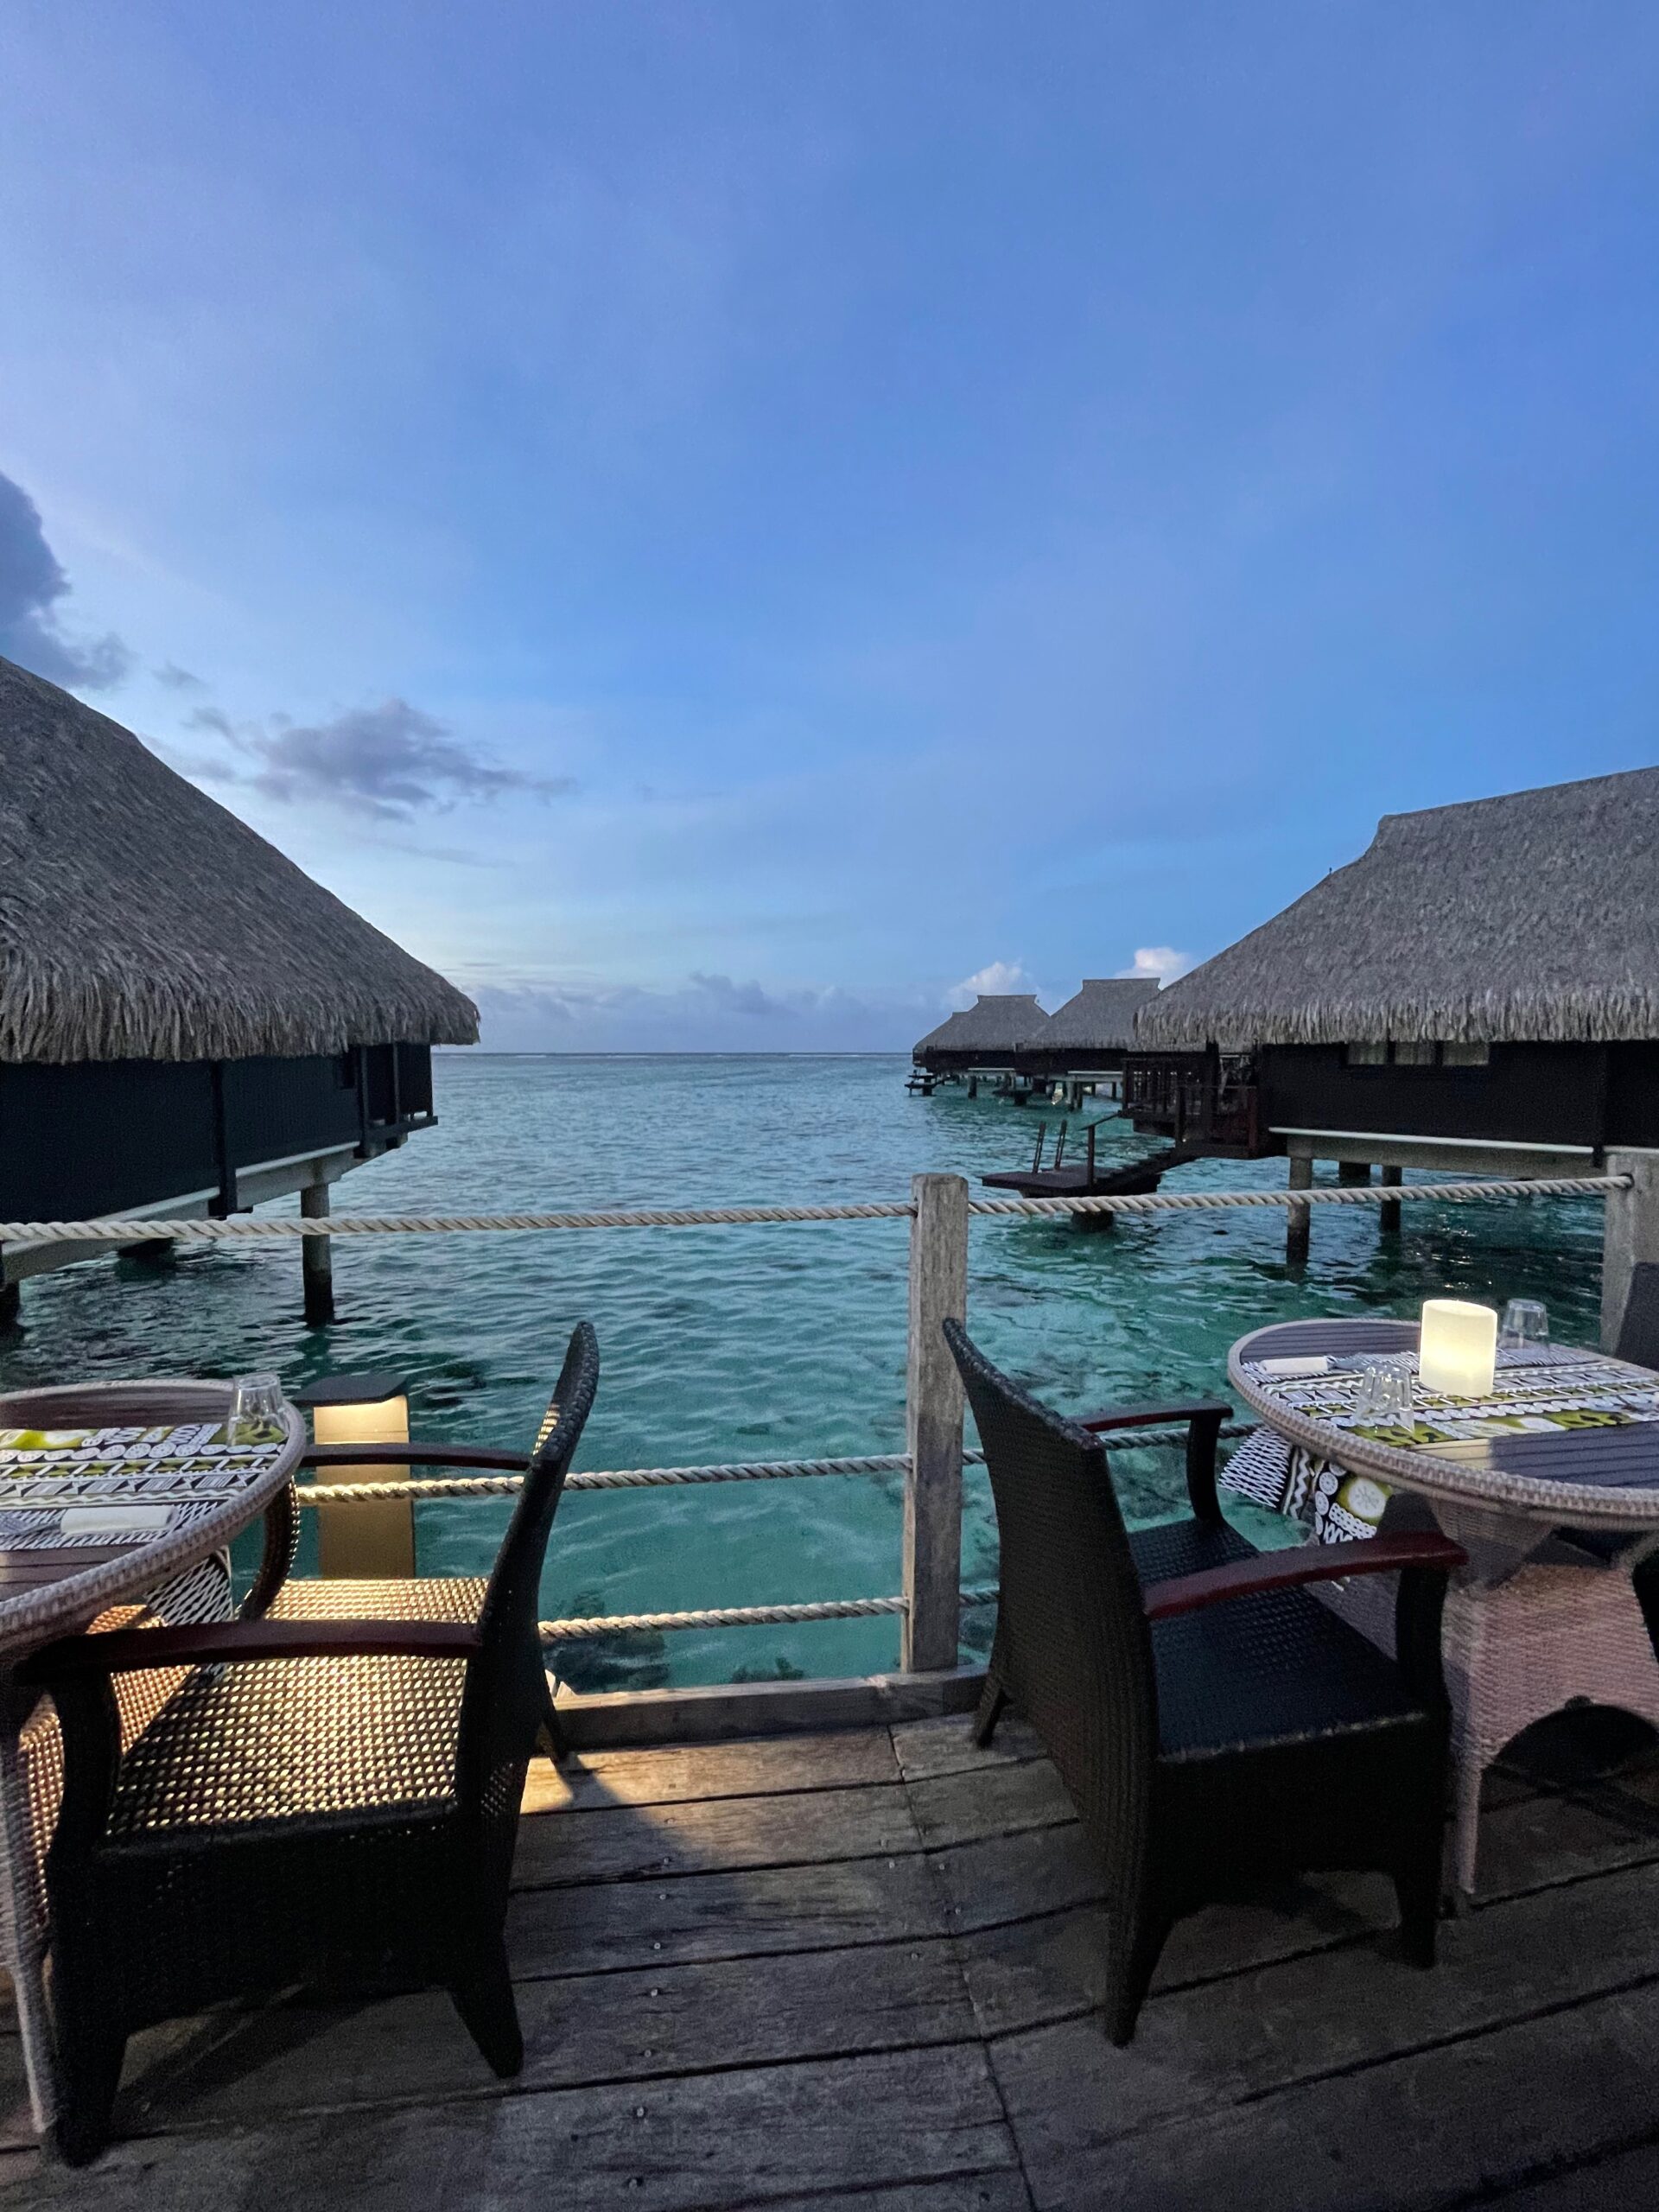 the Taha'a Pearls resort in Tahiti overwater bungalows and dining tables set up looking out over the blue water perfect for a Tahiti honeymoon